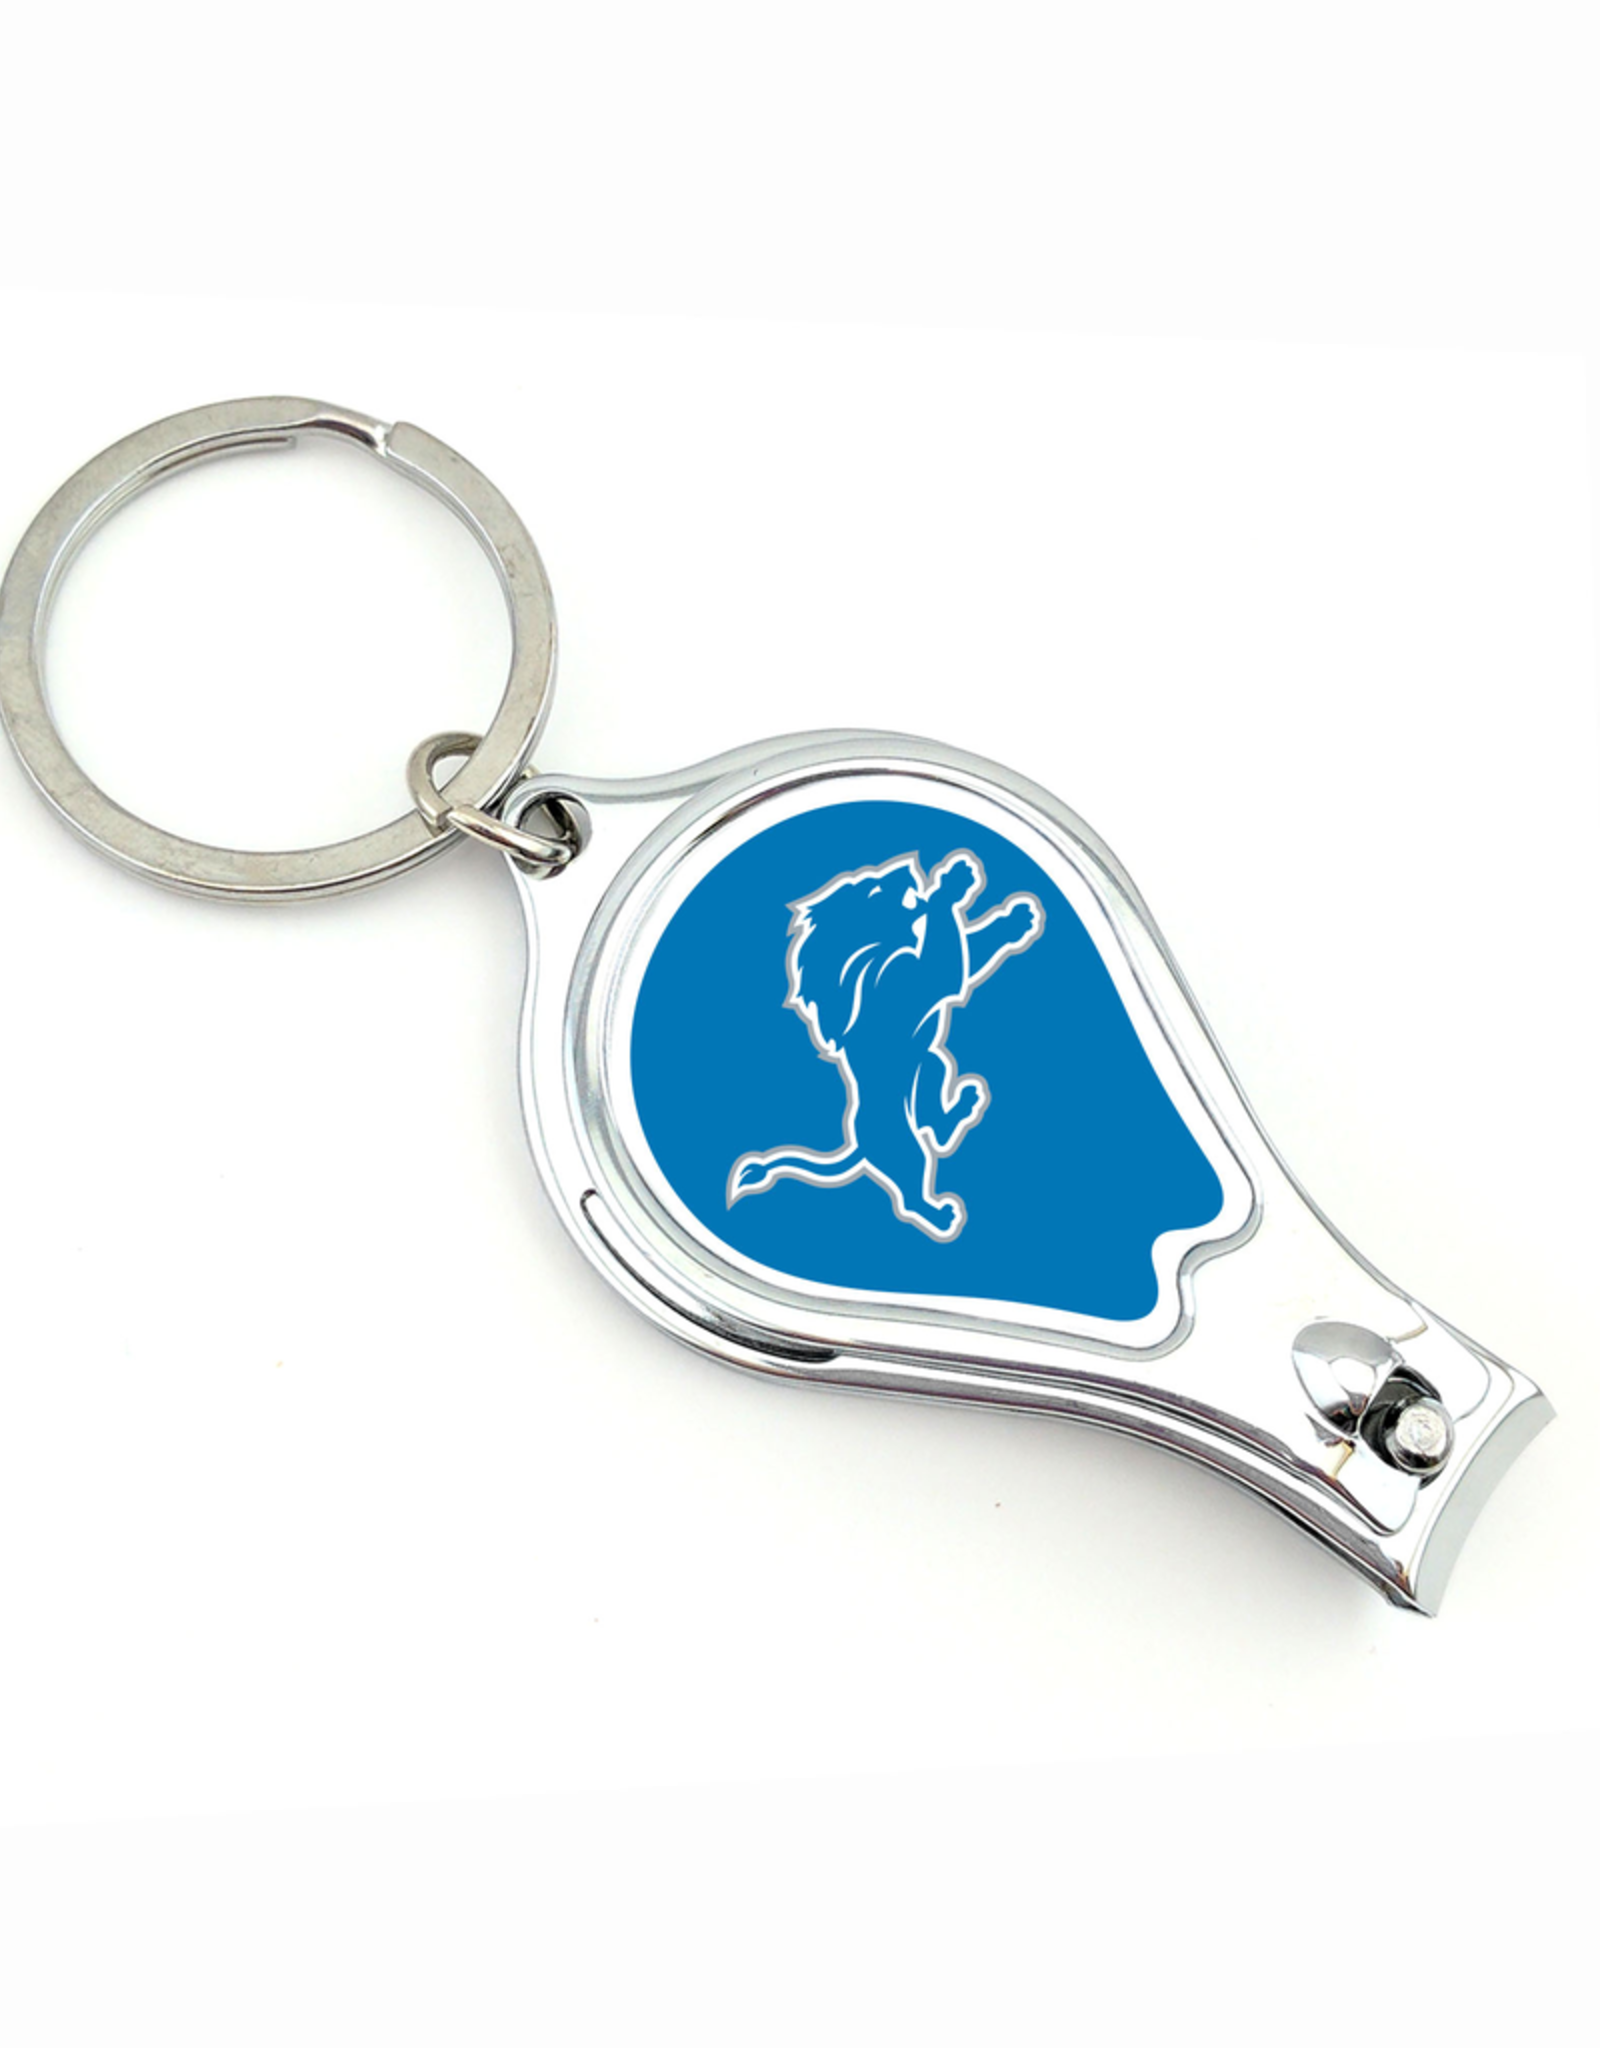 WORTHY PROMOTIONAL PRODUCTS Detroit Lions Multi Function Key Ring